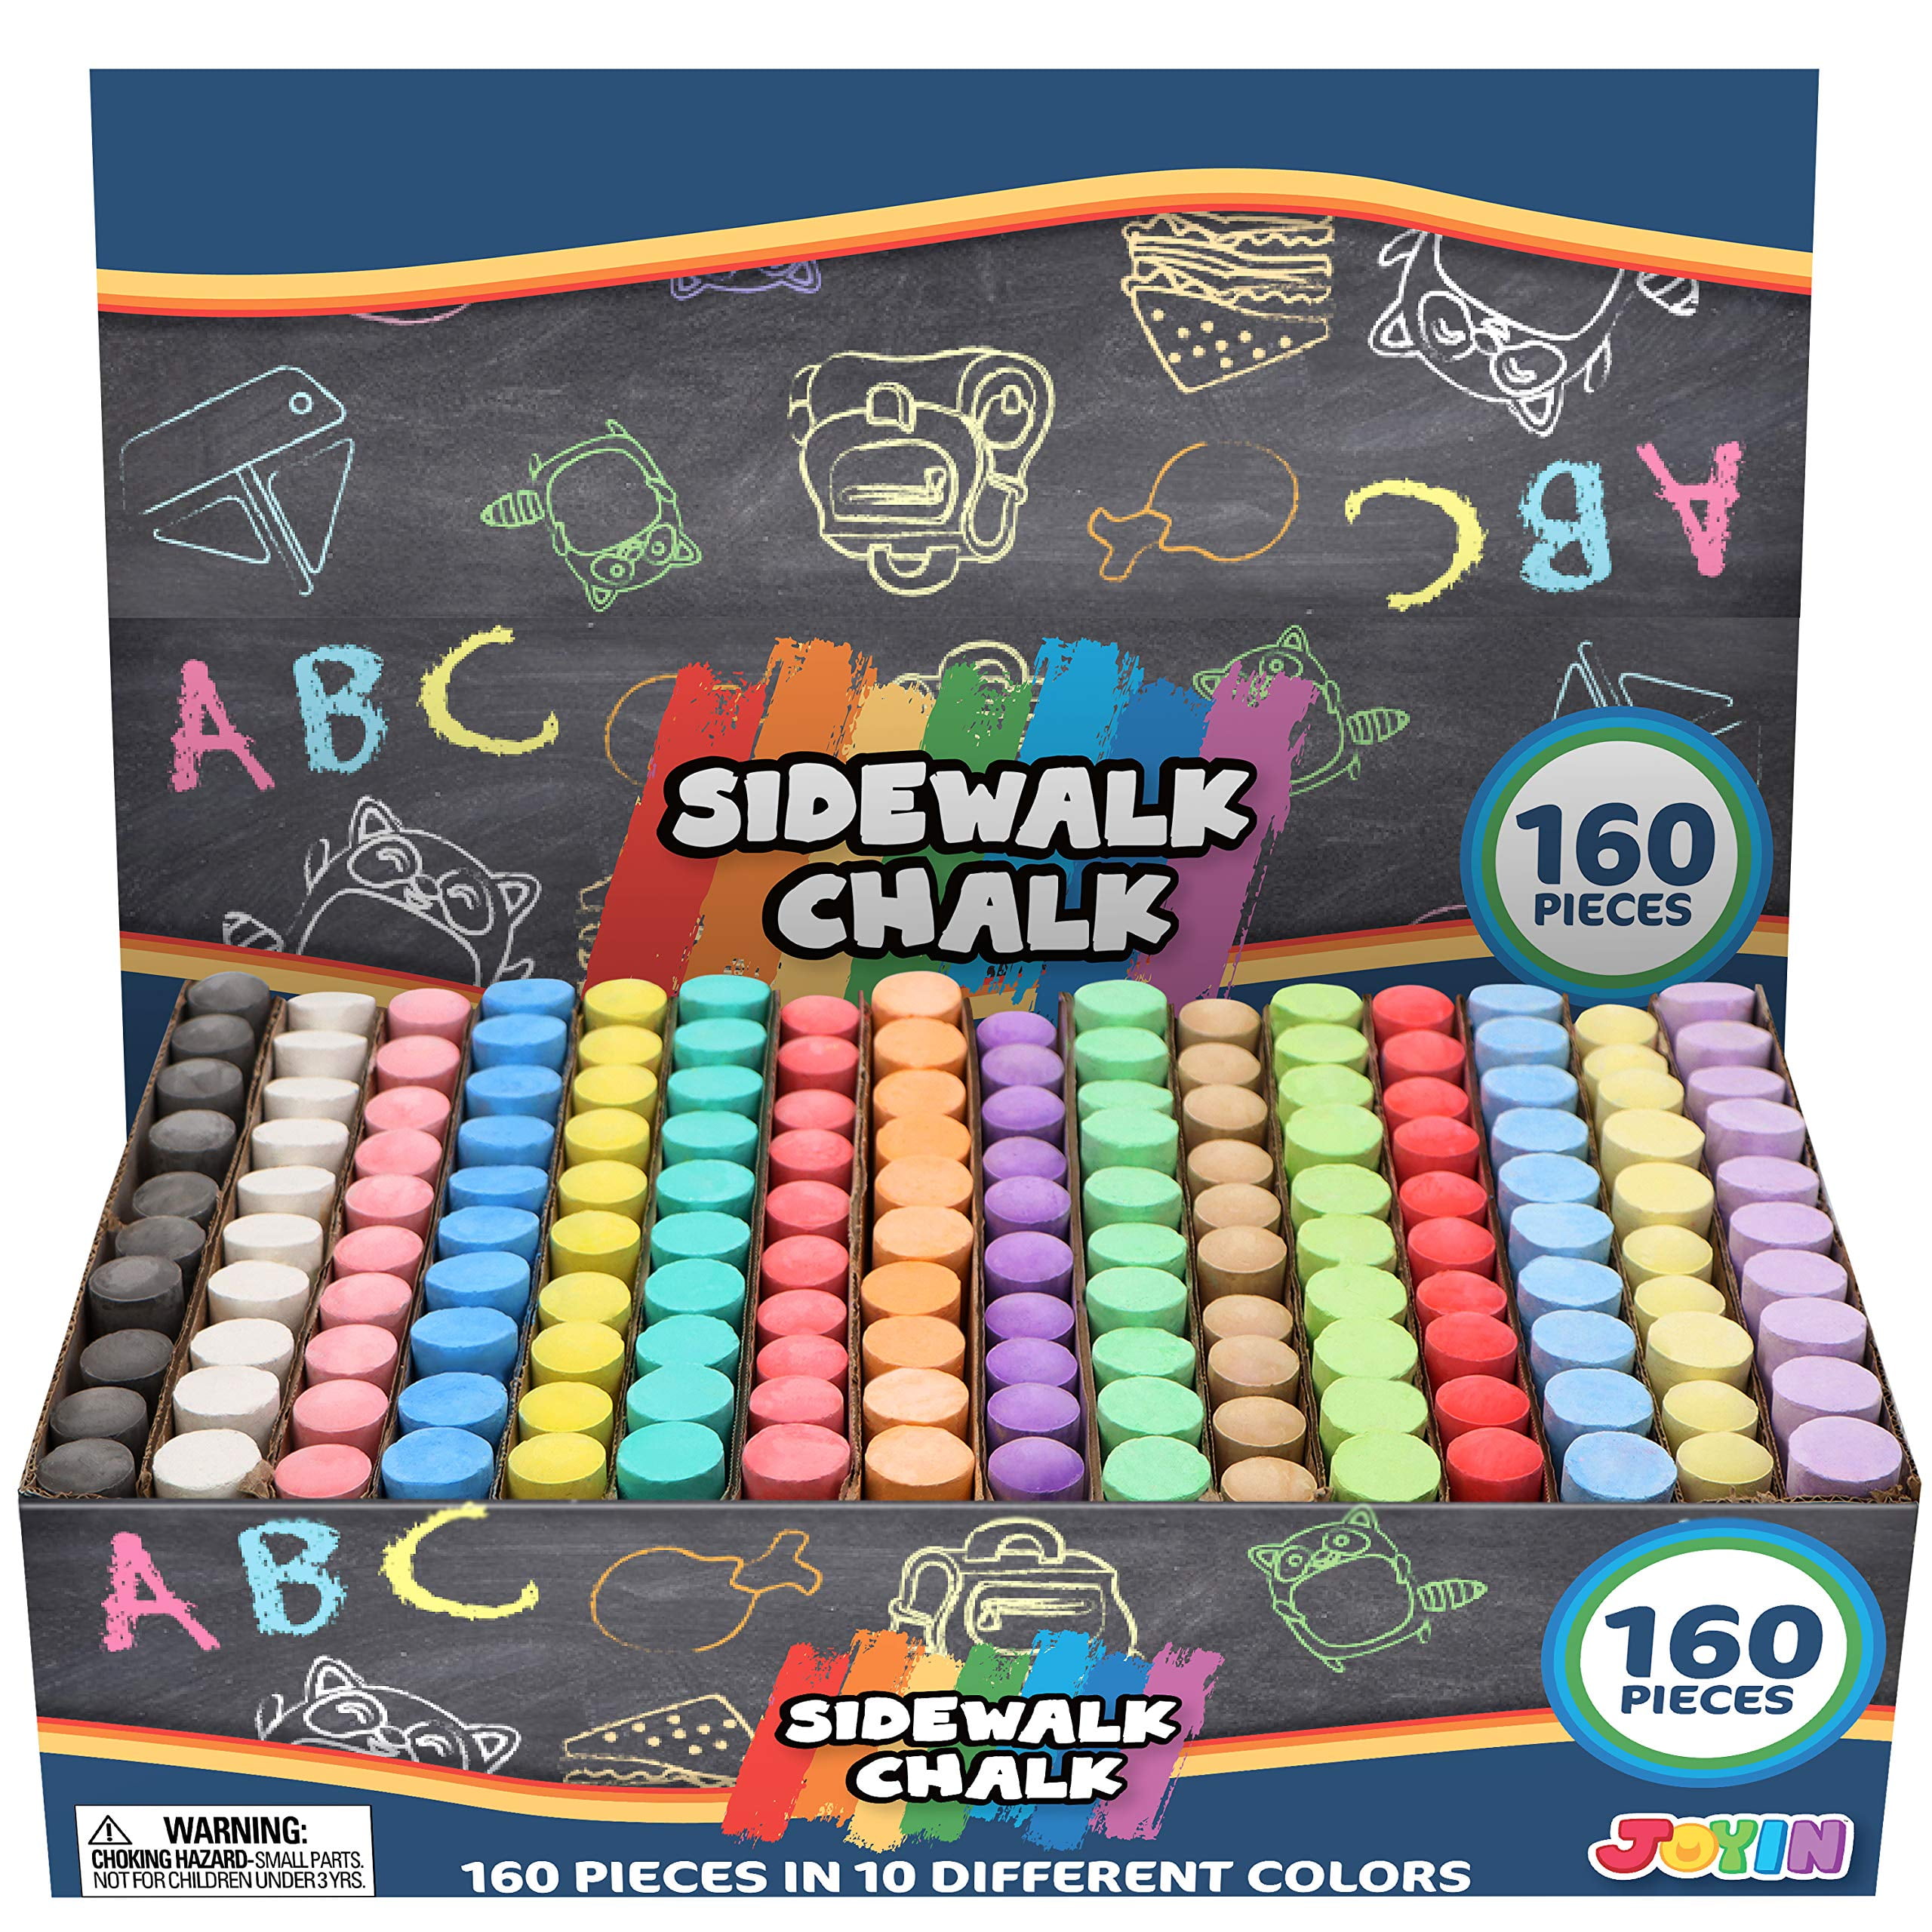 Jumbo Sidewalk Chalk Bulk 4 Pack Assorted Colors 80 Pieces Set Non-toxic  Washable Outdoor w/BCL Storage Bag Art Family School Street Playground